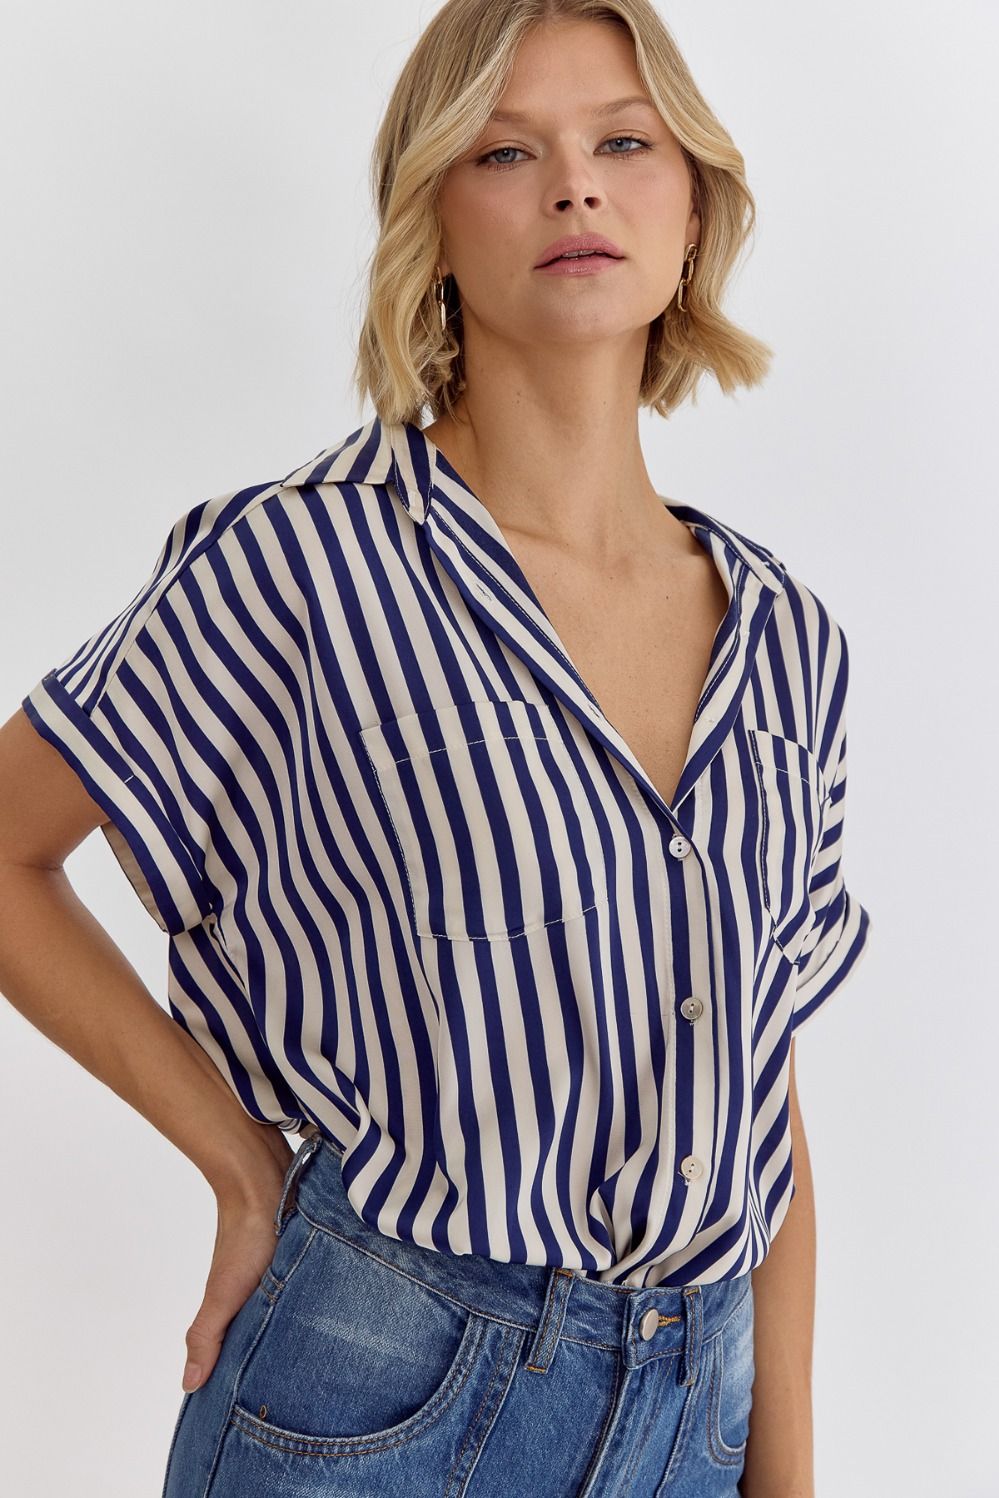 Entro Striped Collared Button Up Top